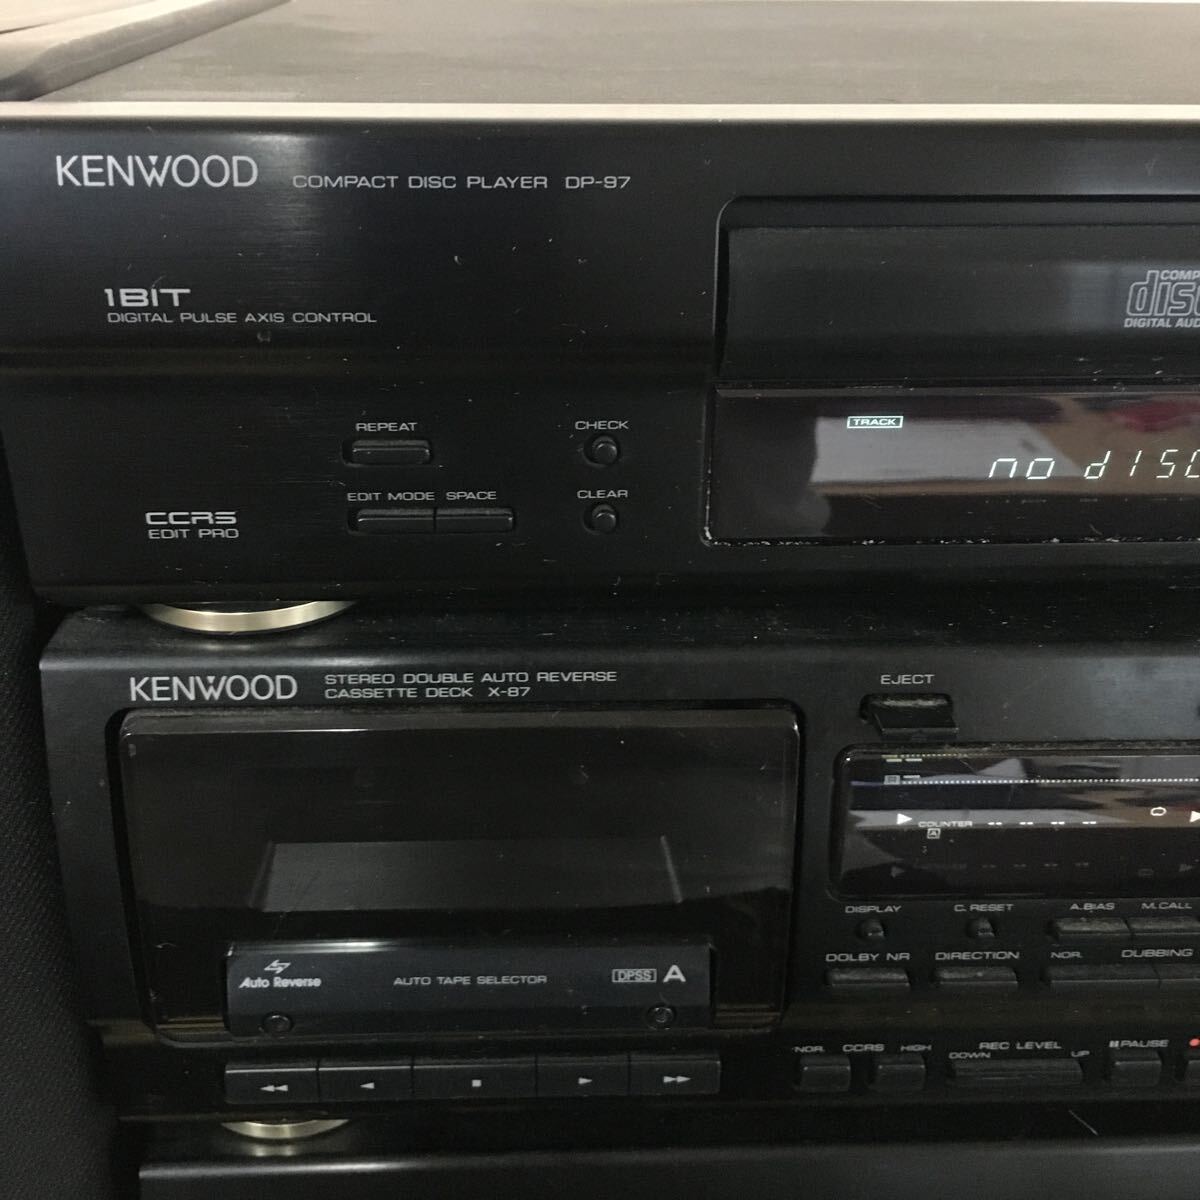 KENWOOD Kenwood system player 3WAY 3 SPEAKER SYSTEM A-97 T-97 DP-97 GE-970 X-87 S-10M audio equipment electrification has confirmed 5si77